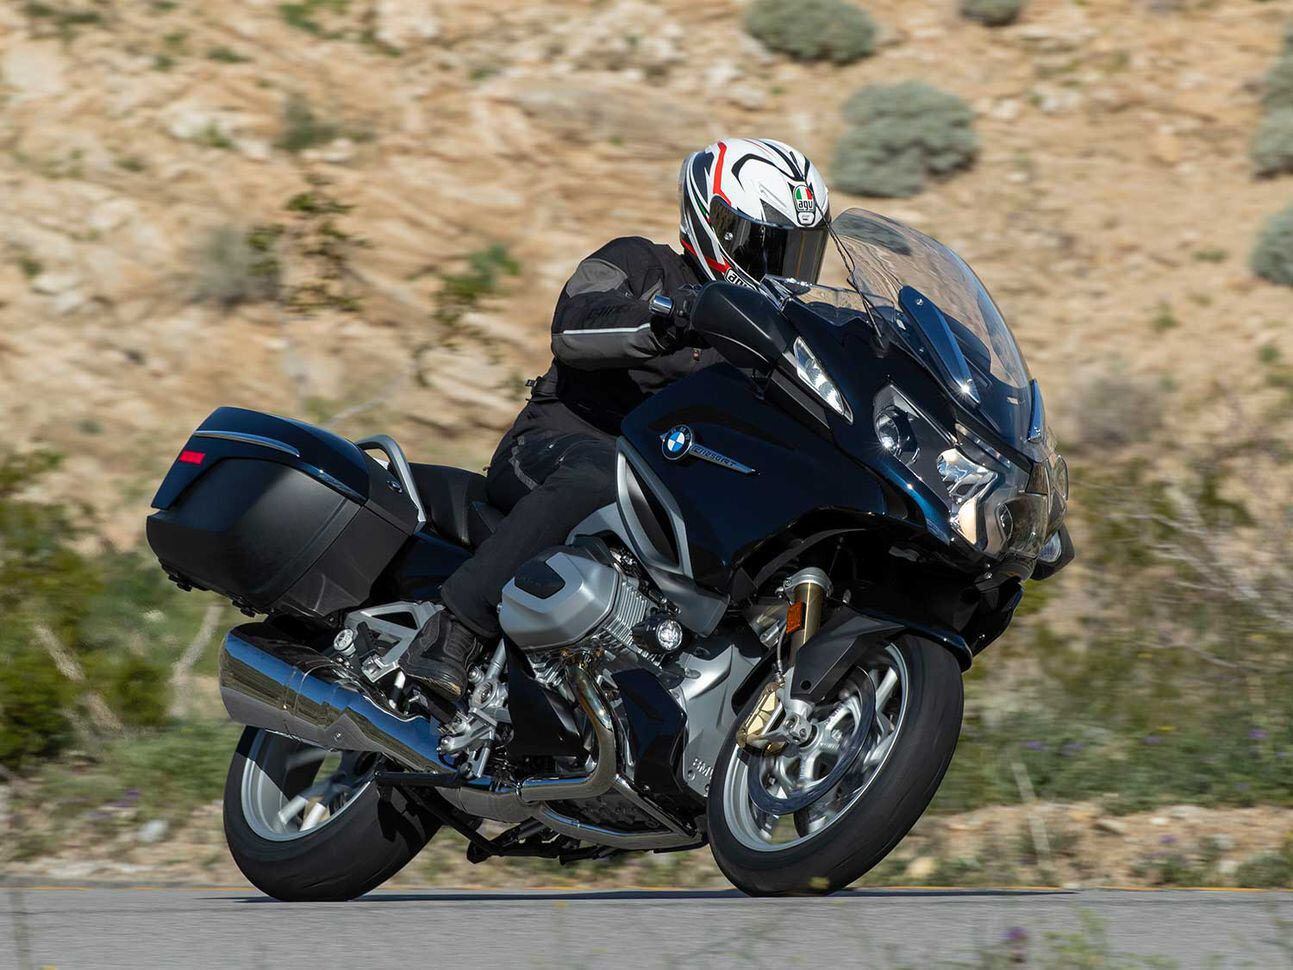 Follow our tips and you'll avoid a lot of pitfalls when buying a motorcycle online.